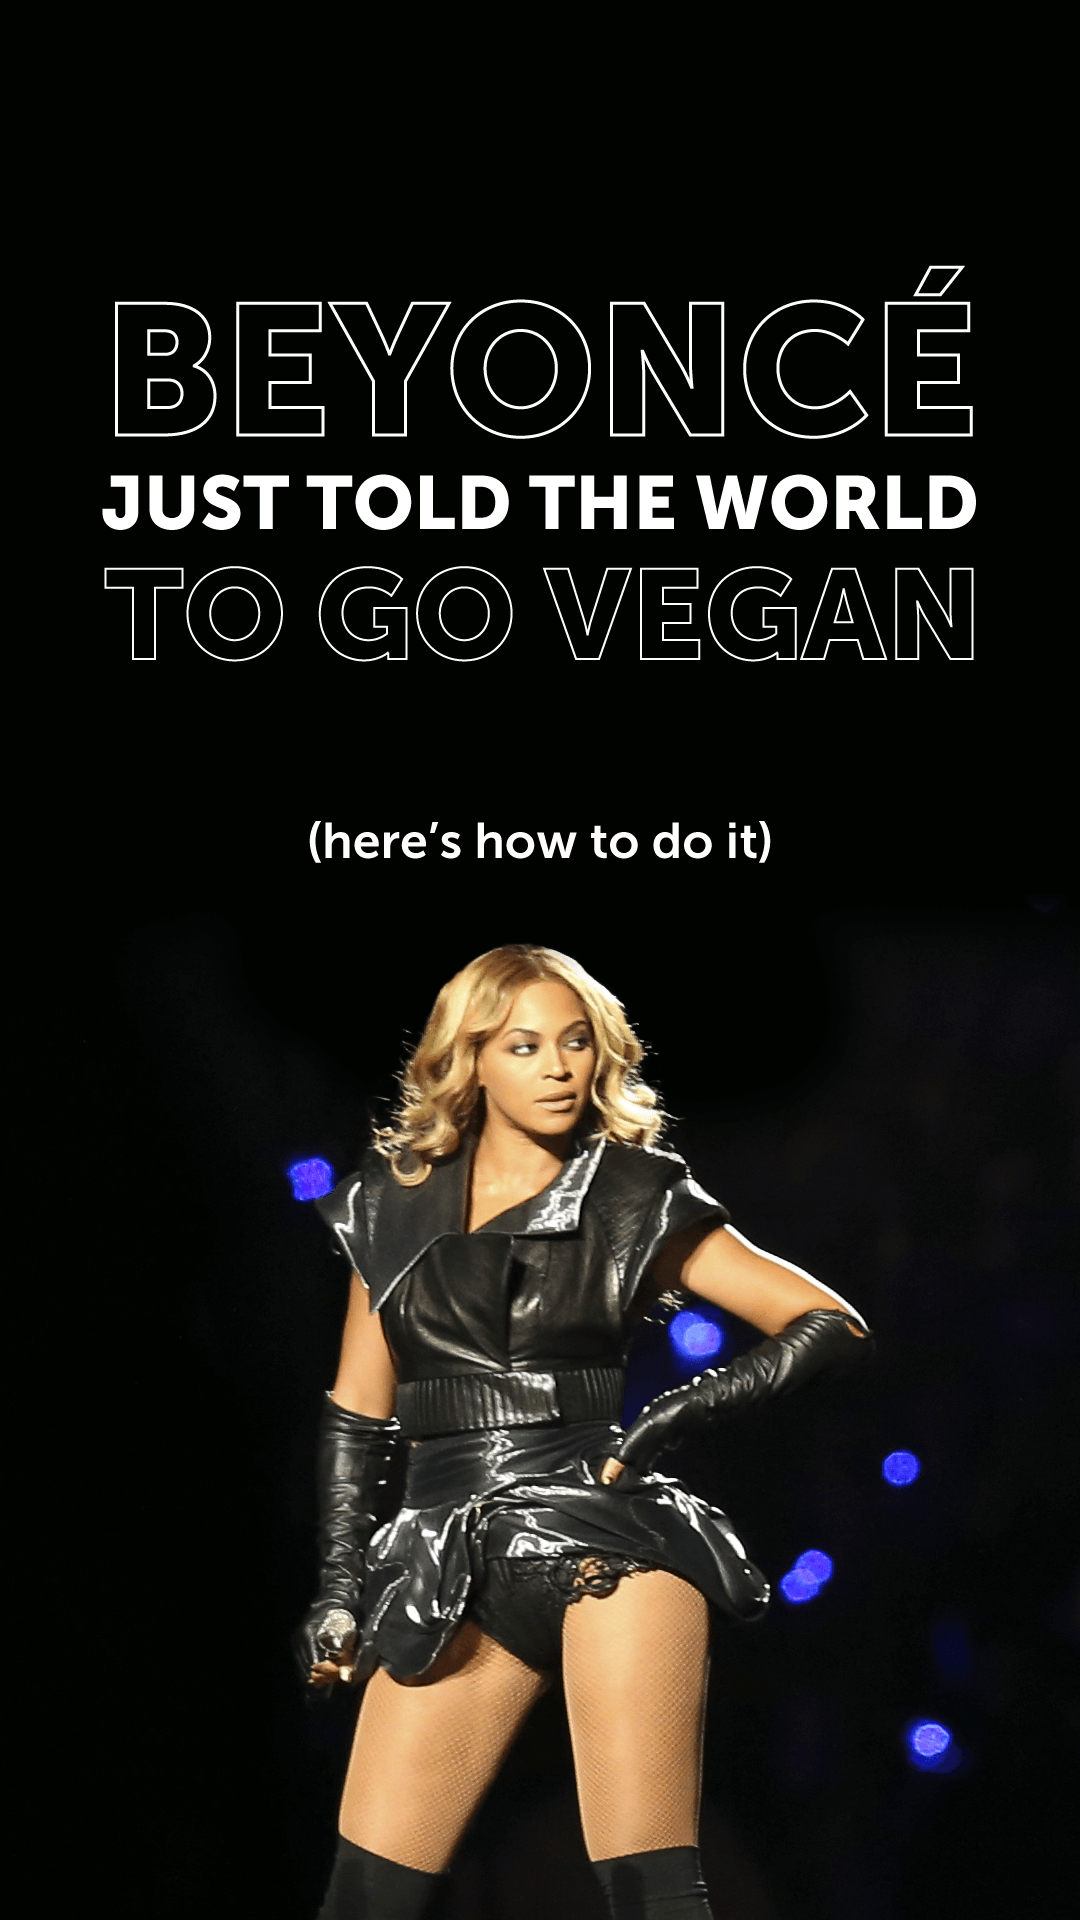 Beyoncé Just Told the World to Go Vegan... Here’s How to Do It - 1080 x 1920 png 365kB